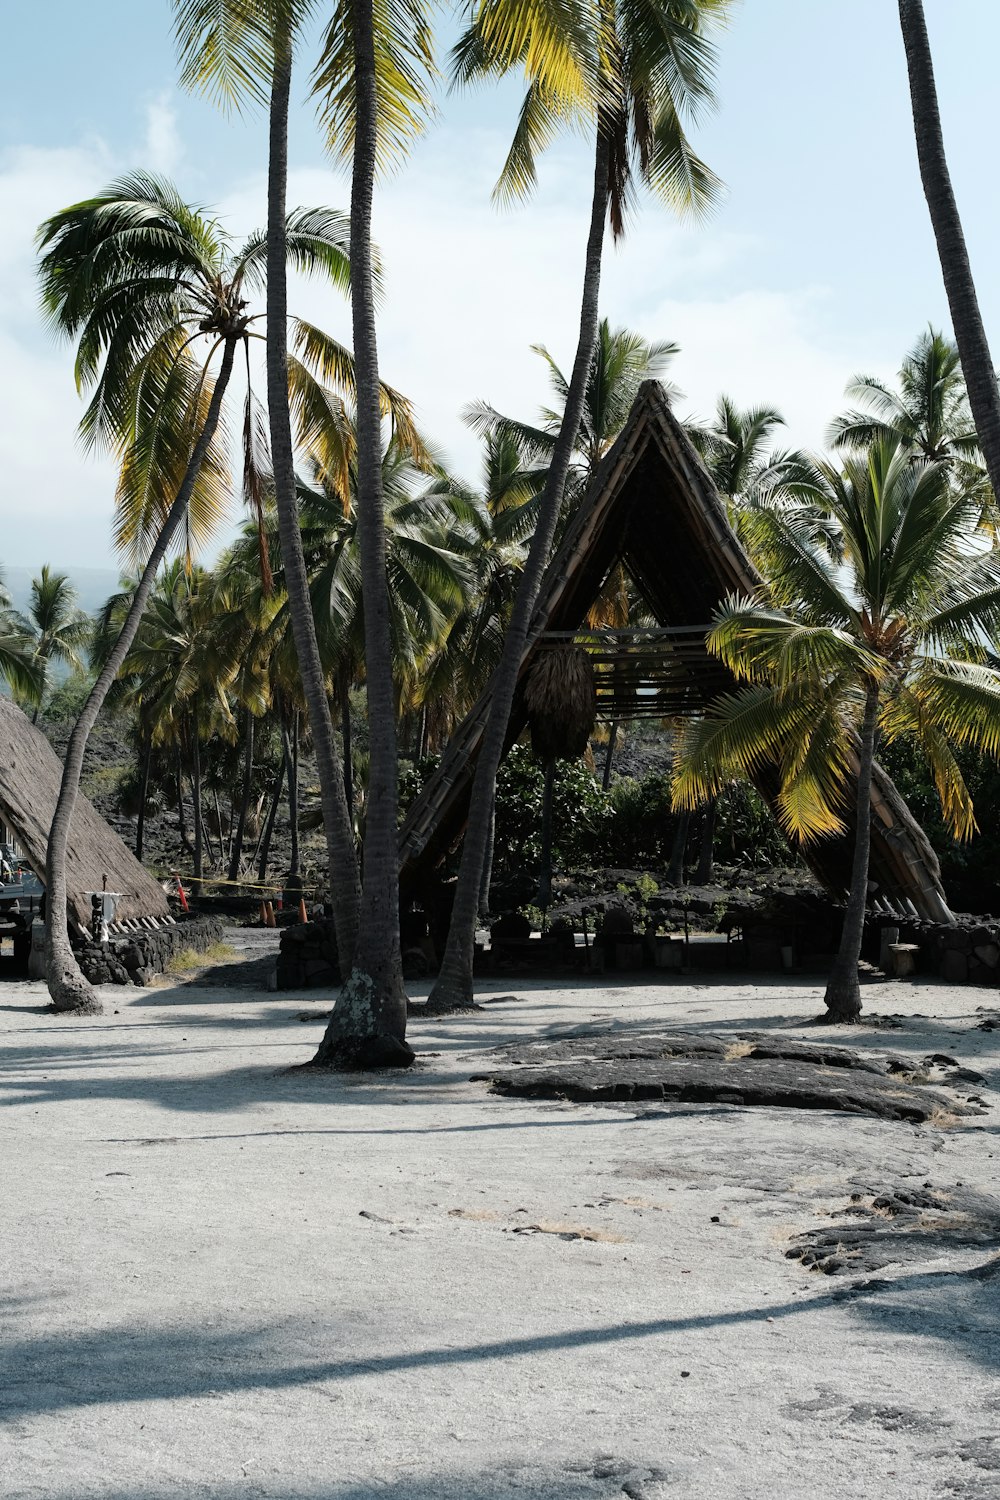 a beach area with palm trees and a hut